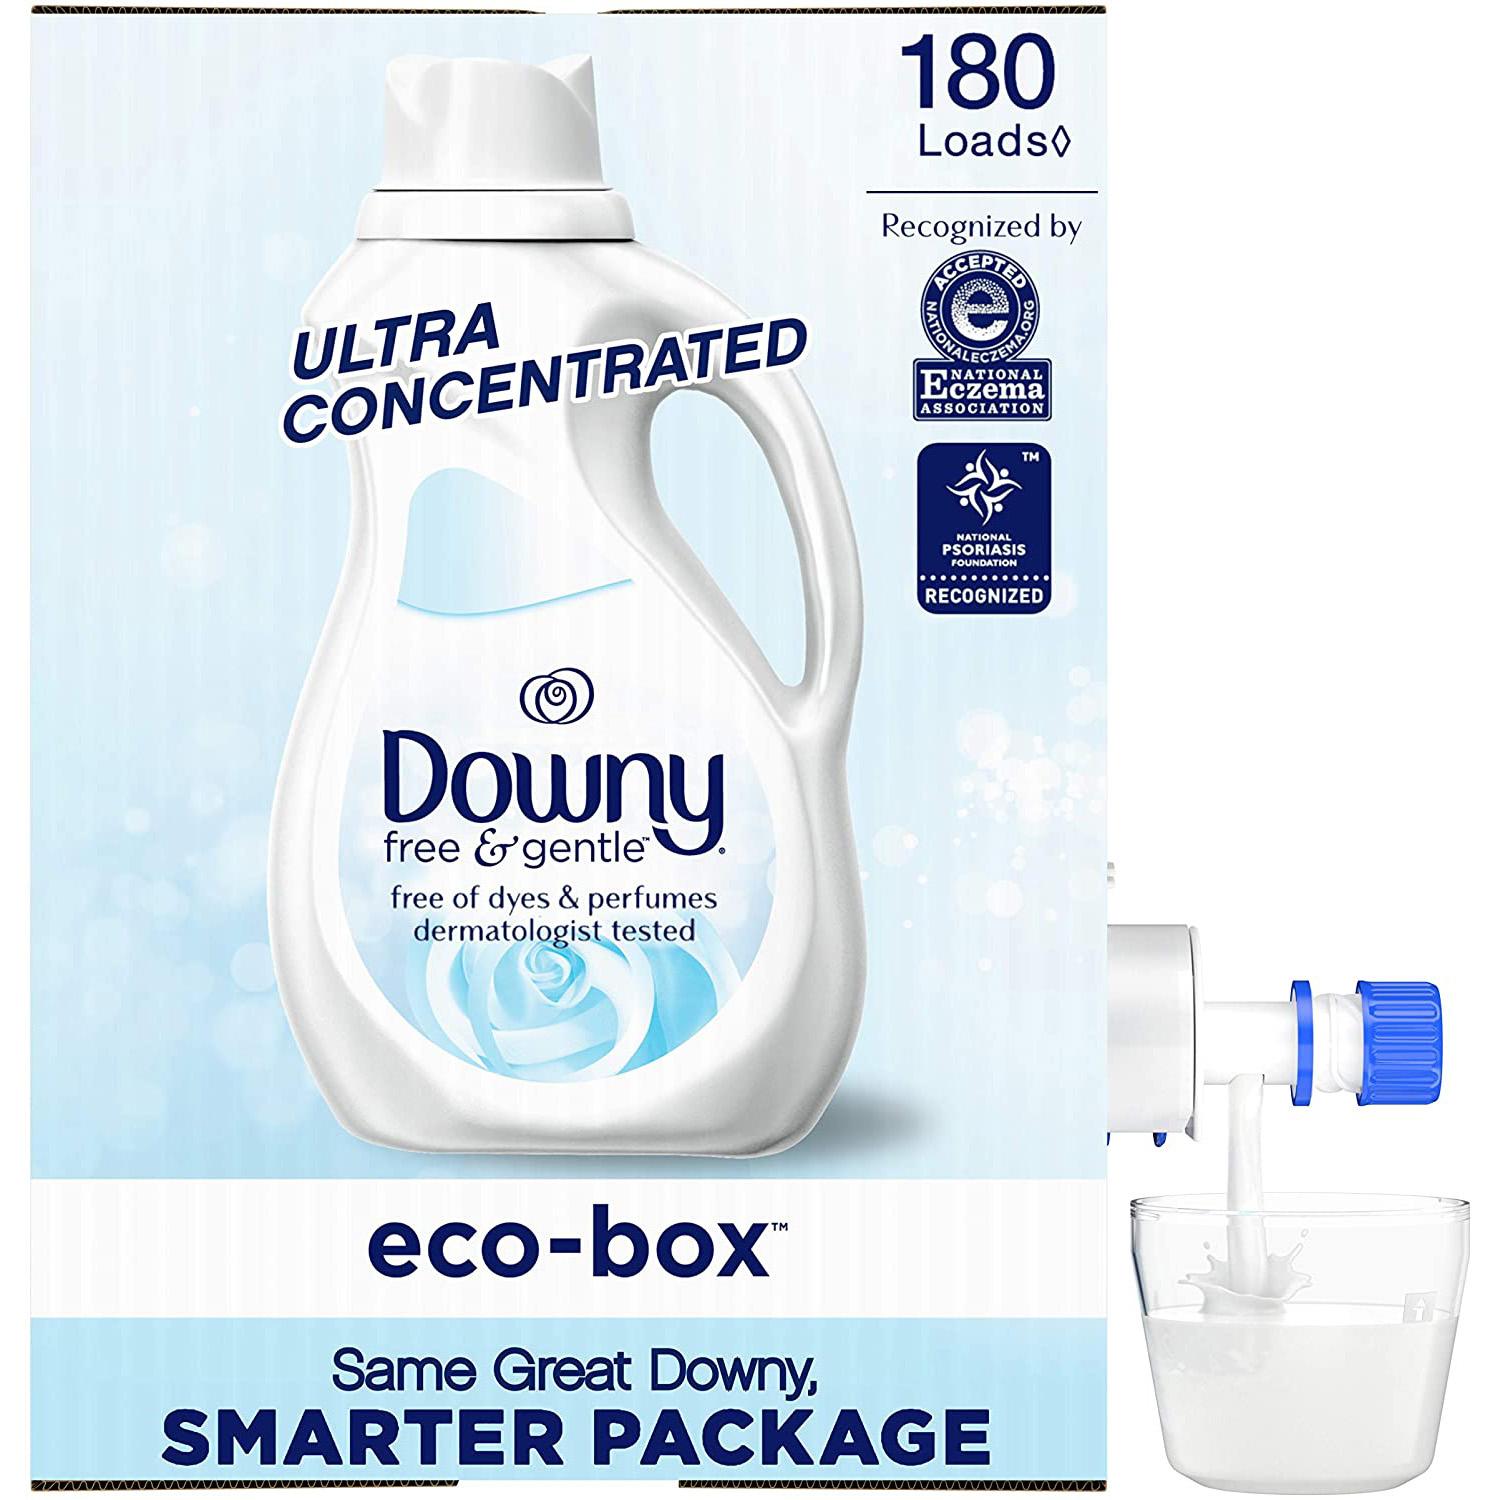 Downy Eco-box Ultra Concentrated Liquid Fabric Conditioner for $8.53 Shipped